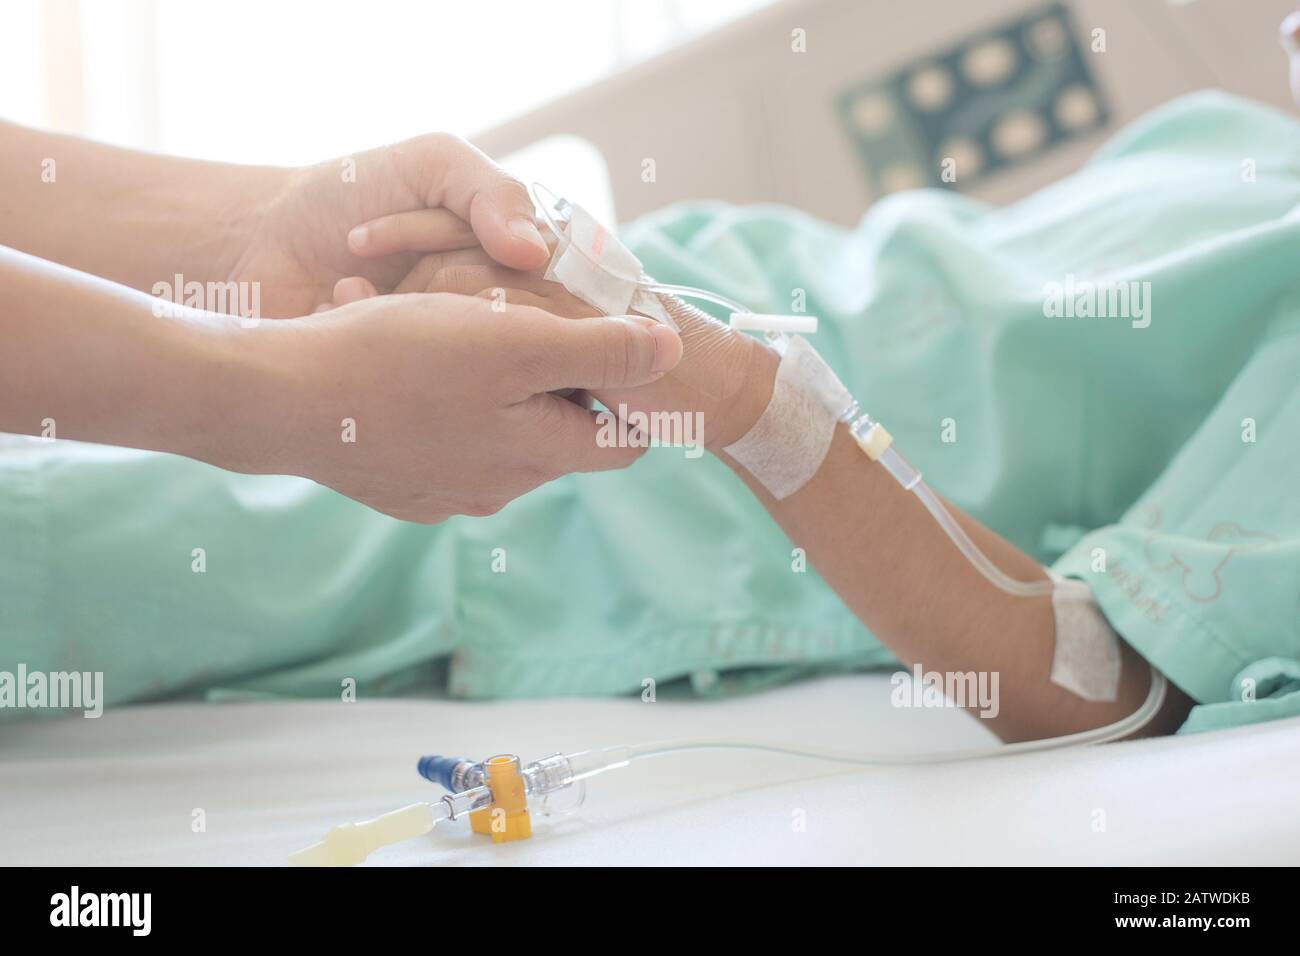 Health care medical. Closeup hands of mother and sick little girl holding together on sickbed in hospital to give encouragement. Stock Photo